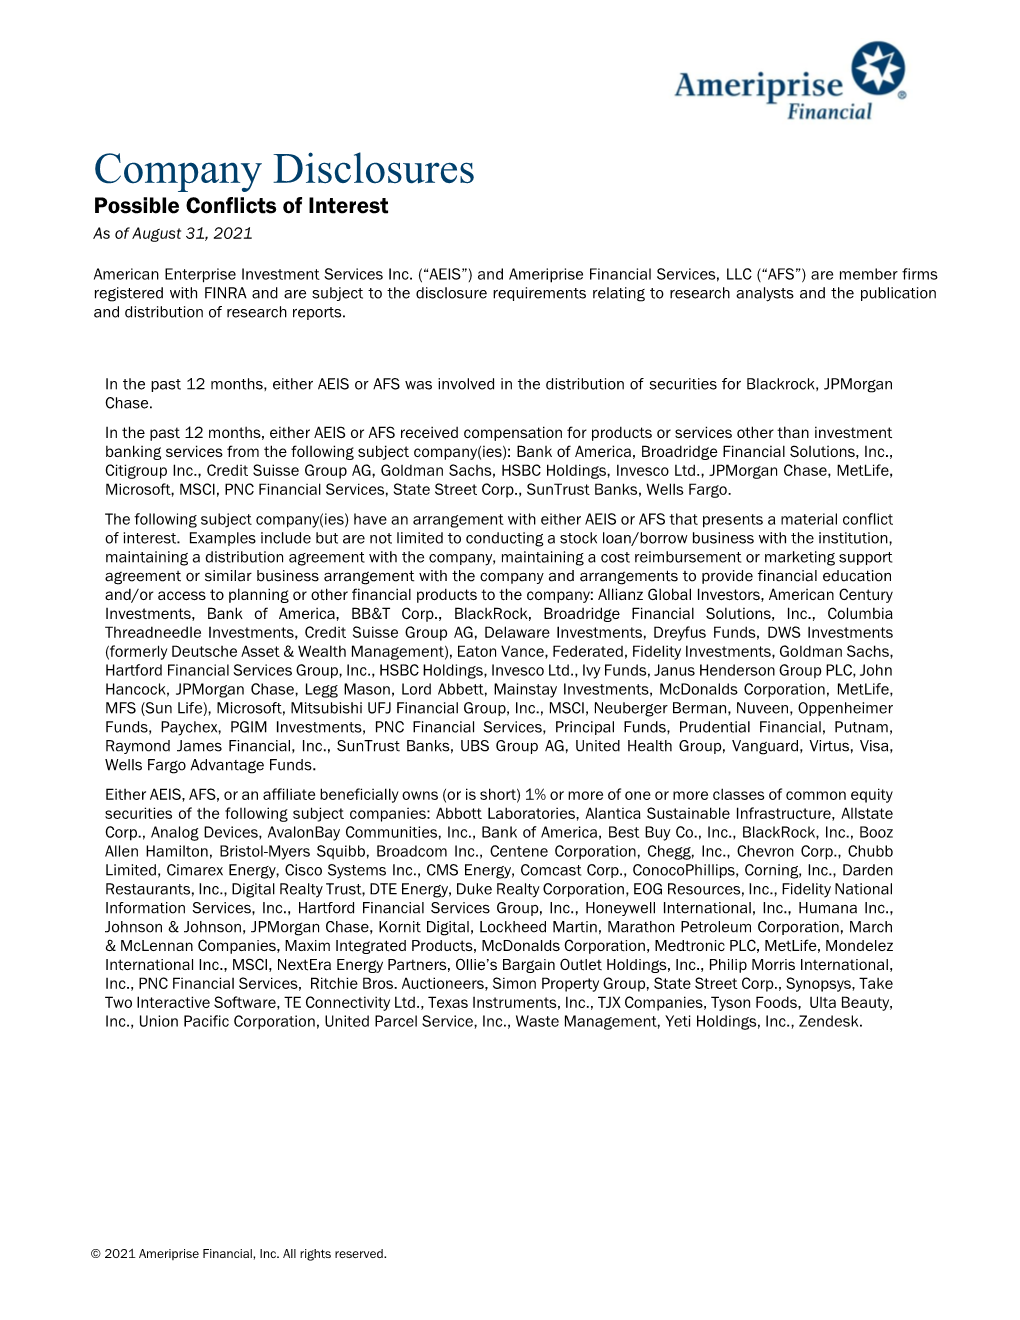 Company Disclosures Possible Conflicts of Interest As of August 31, 2021